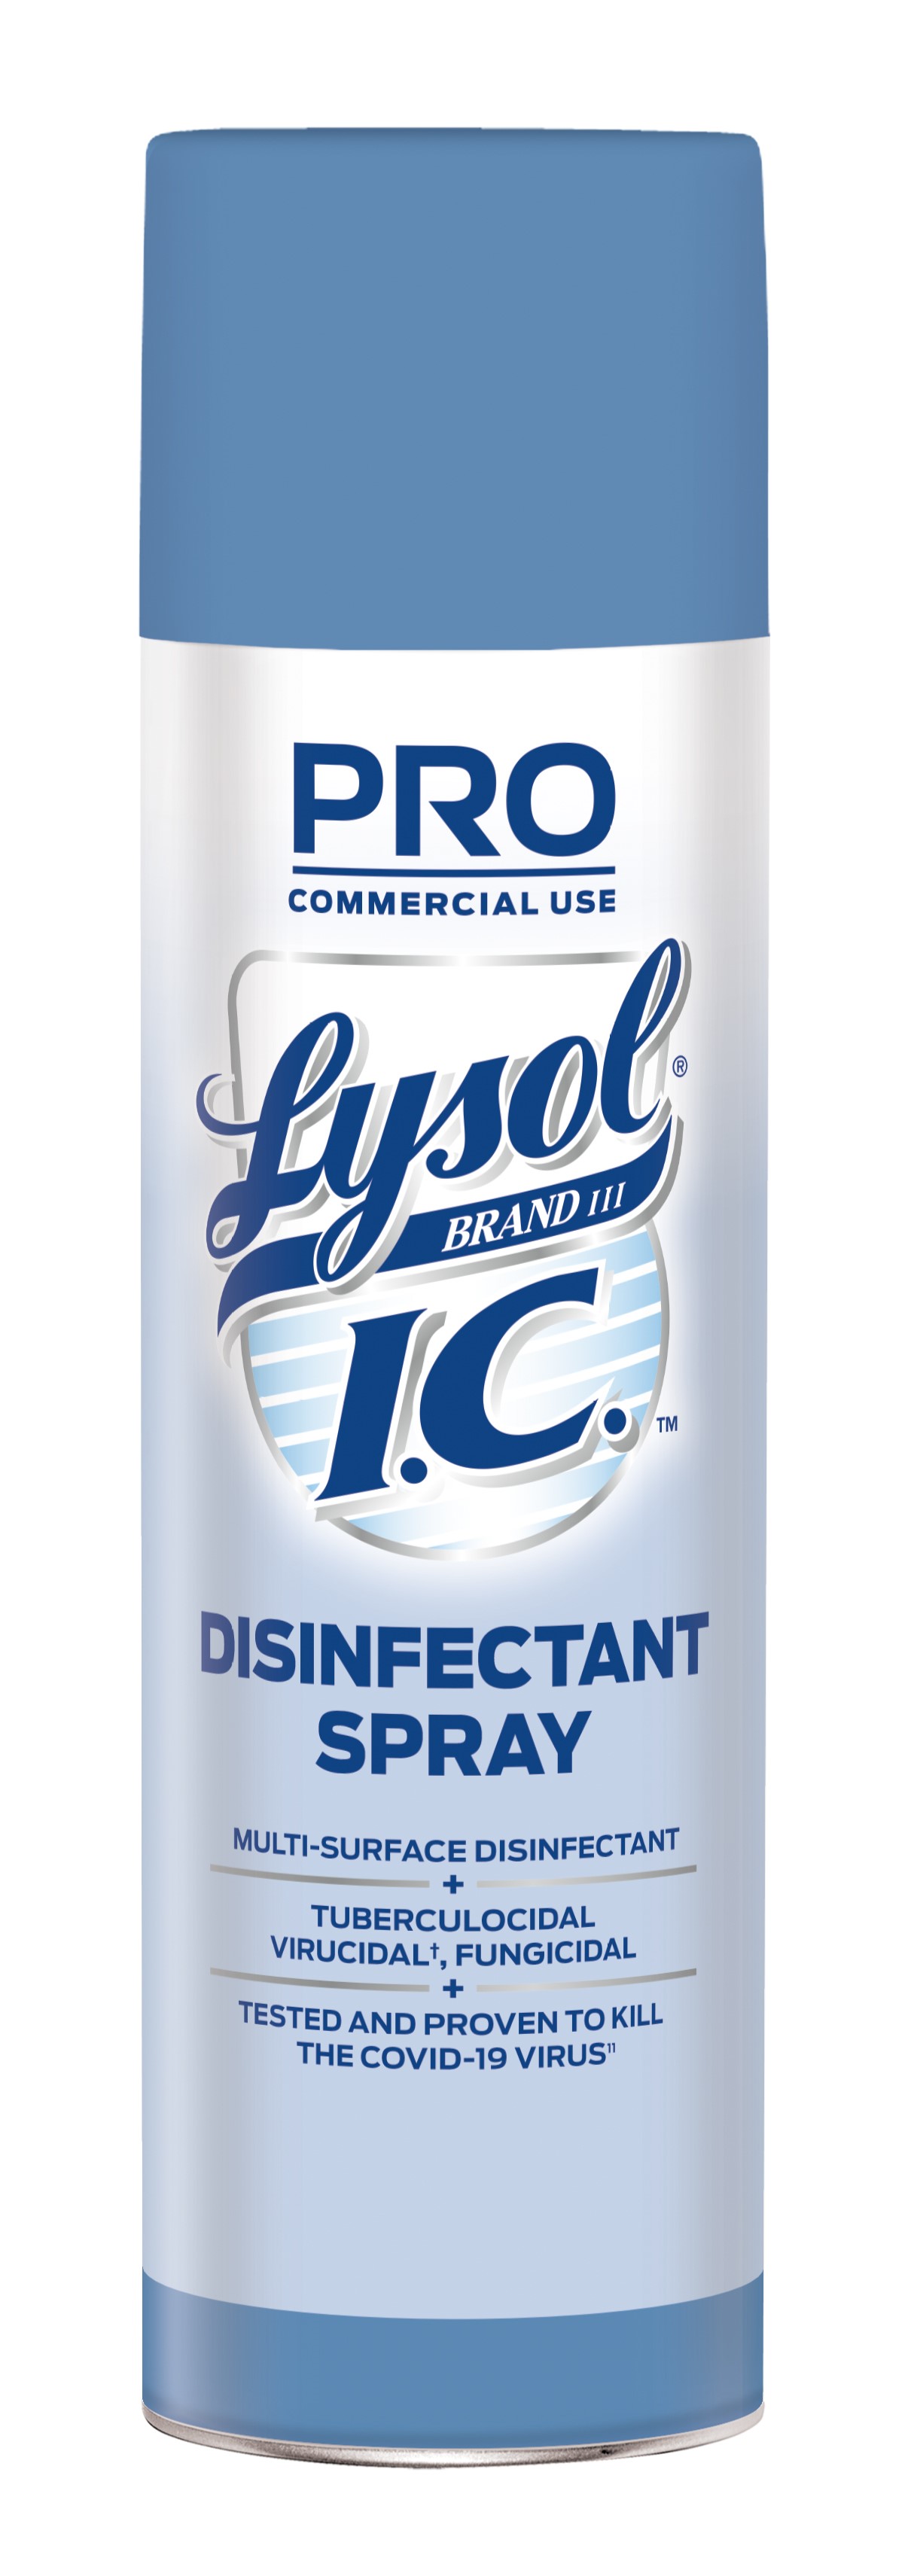 LYSOL® IC™ Brand III Disinfectant Spray